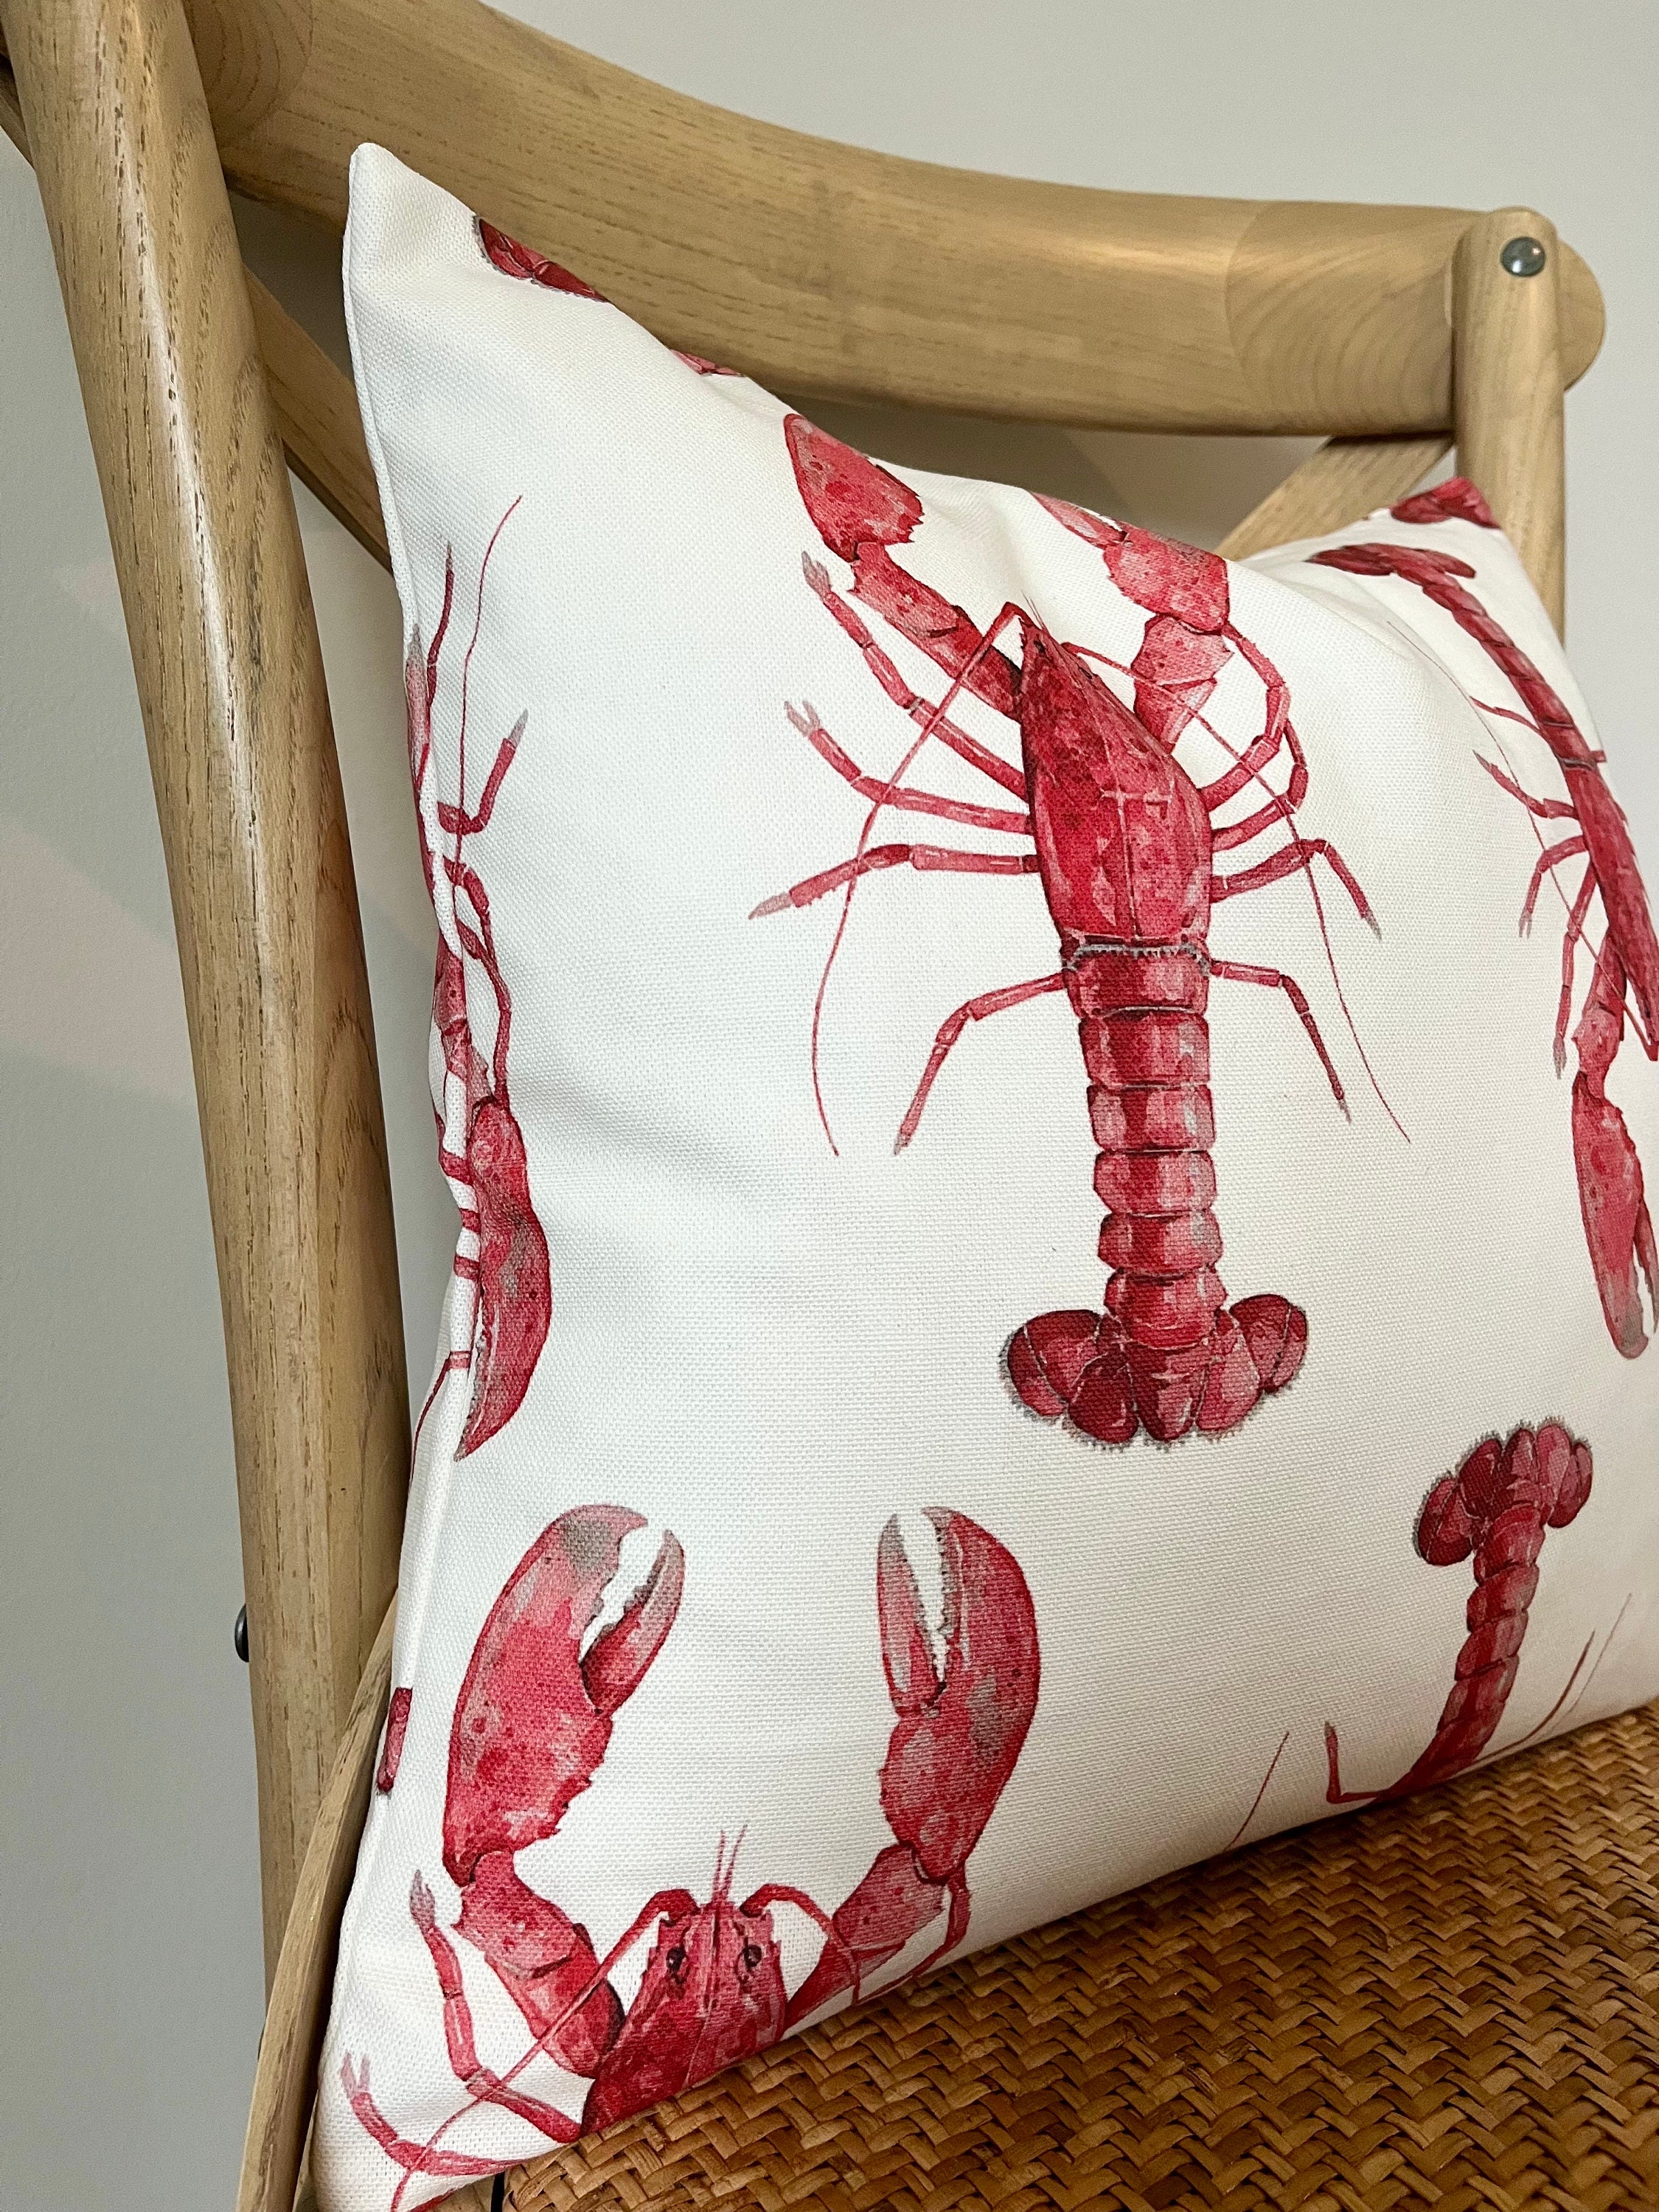 Lobster Red and White Pillow Cover, Throw Pillow Cushion, 14 X 14 